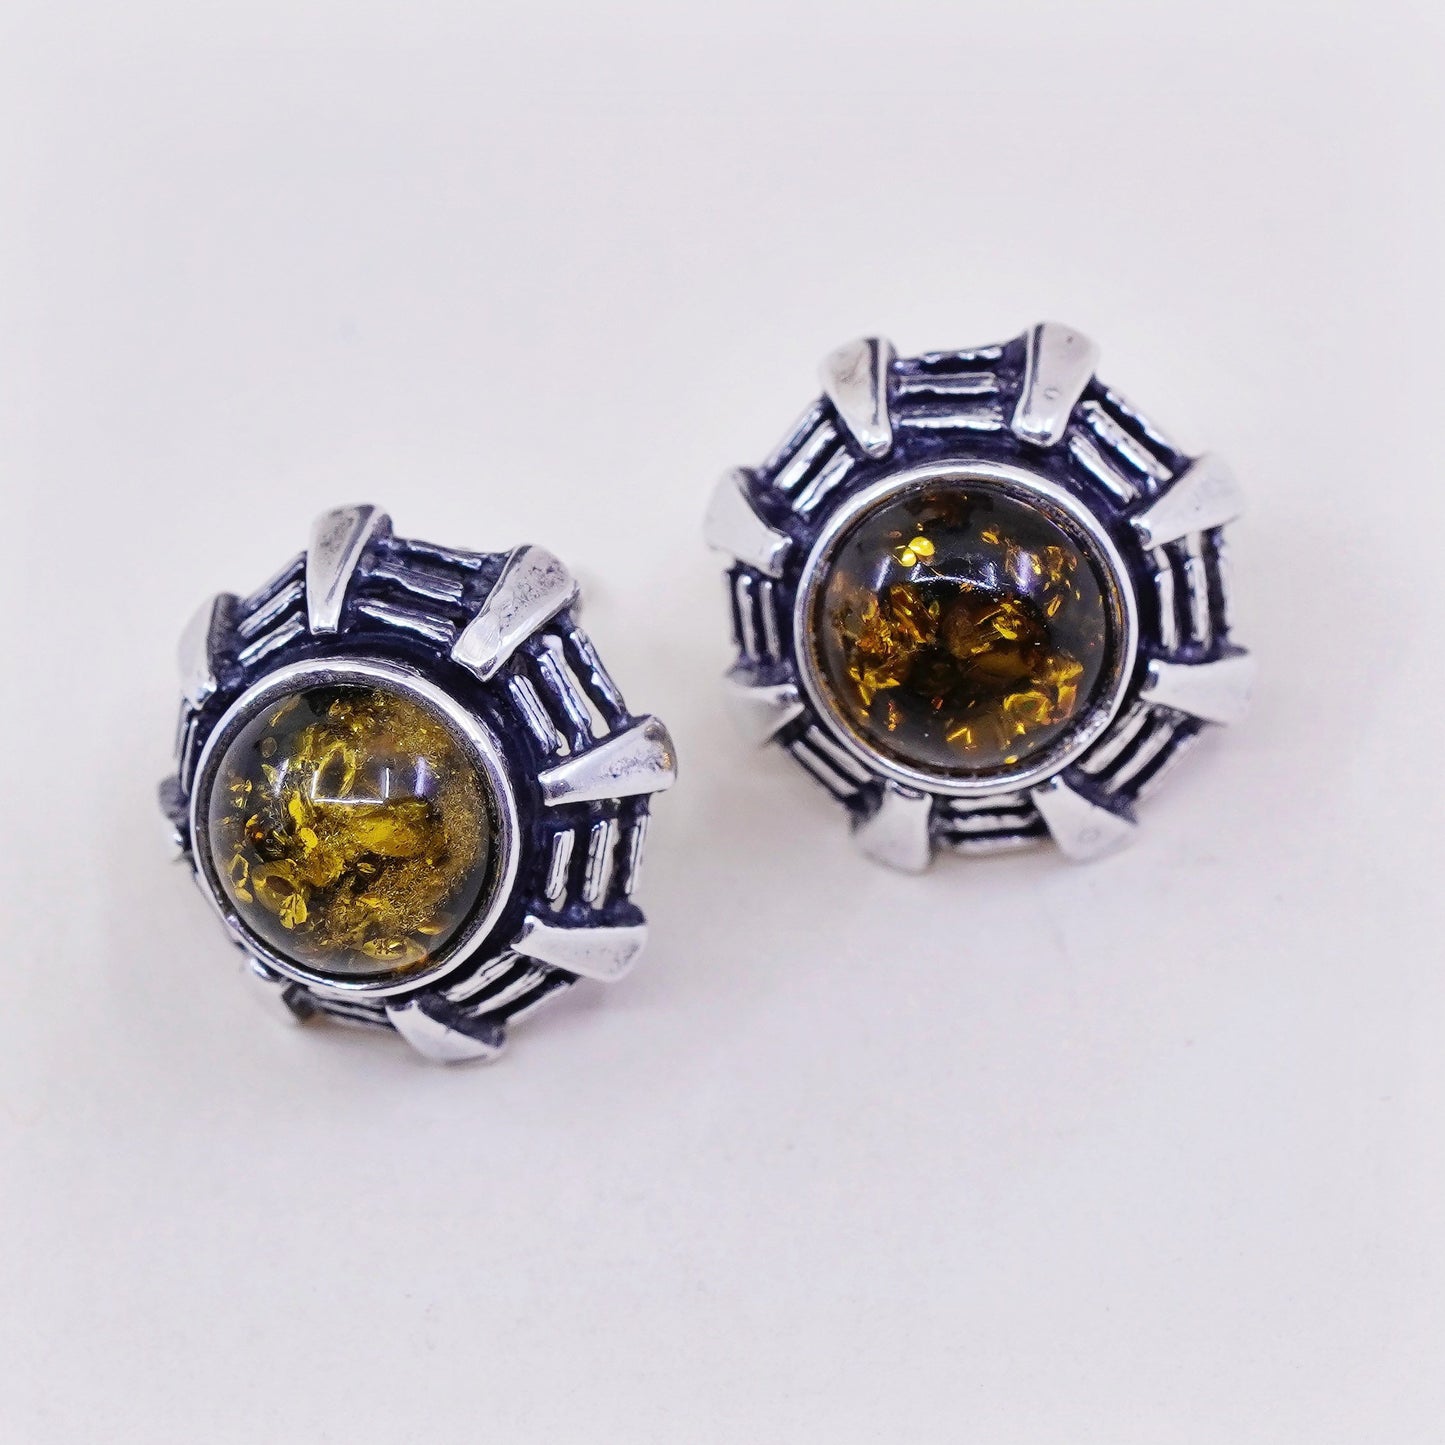 Sterling 925 silver handmade earrings with round Amber studs, southwestern